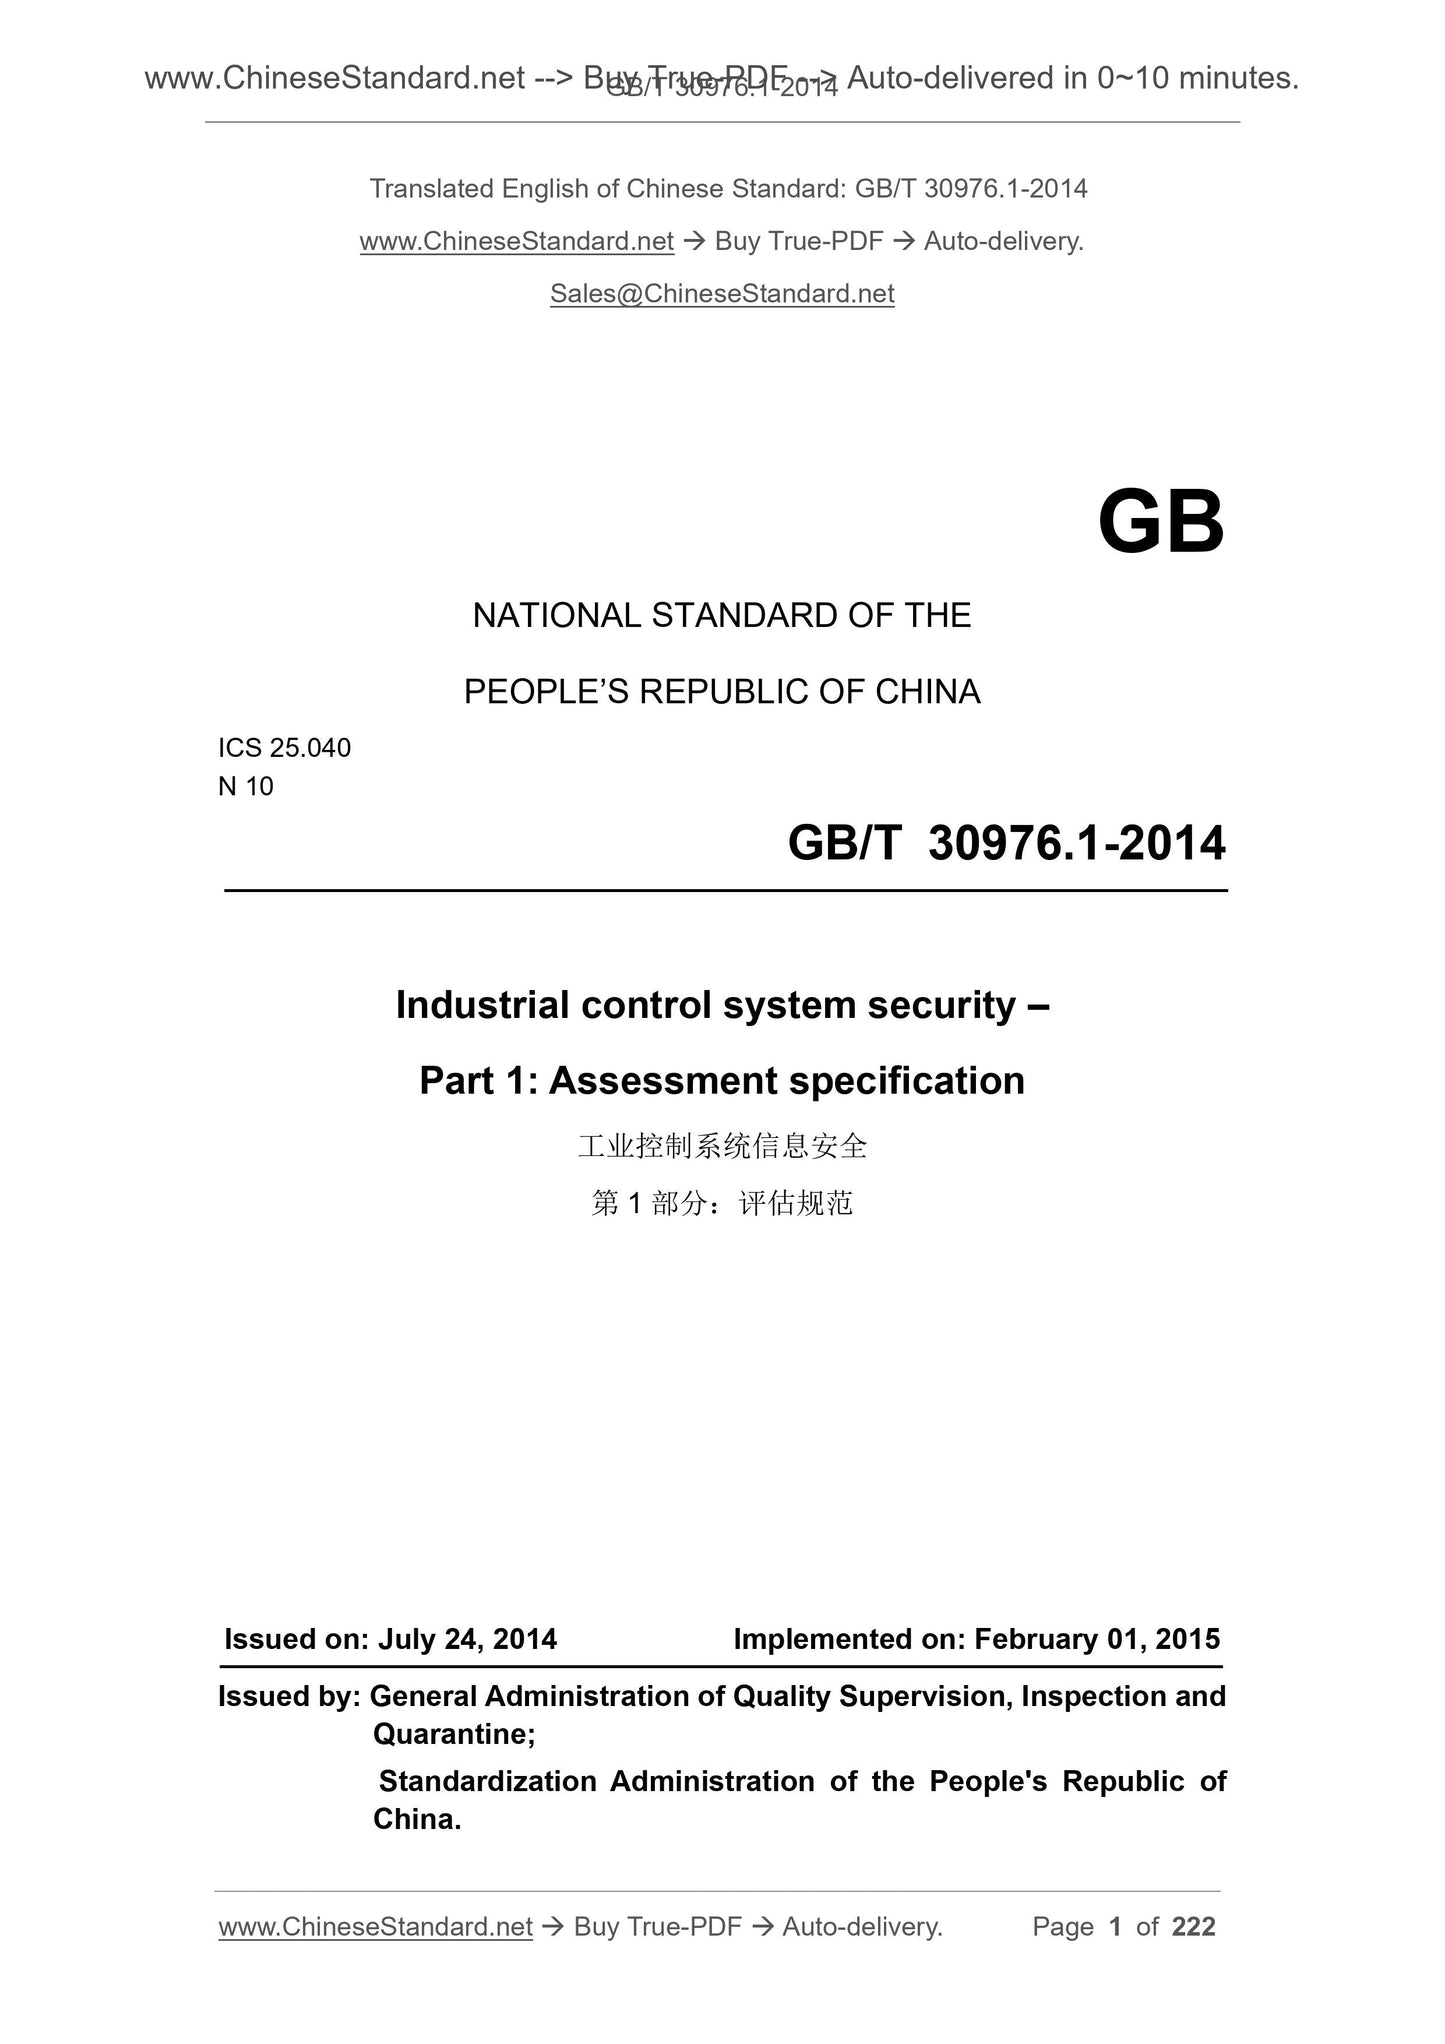 GB/T 30976.1-2014 Page 1